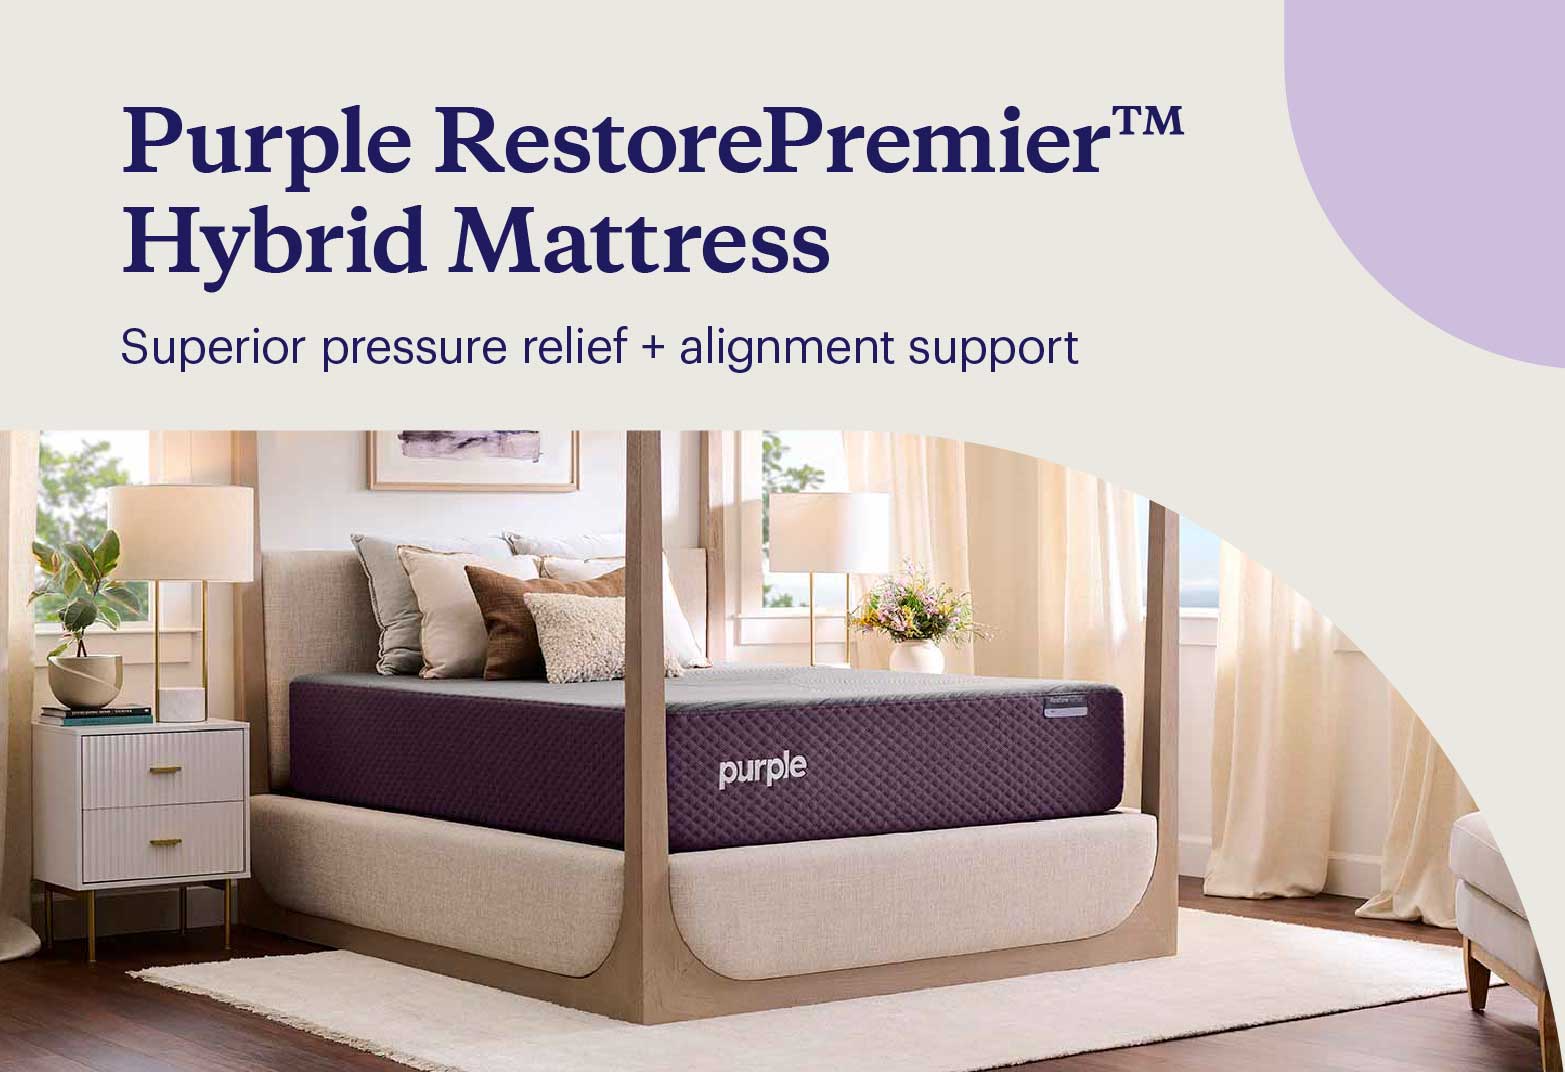 Key features of the RestorePremier™ Hybrid shown with the mattress on a poster-style bedframe in a luxurious bedroom.